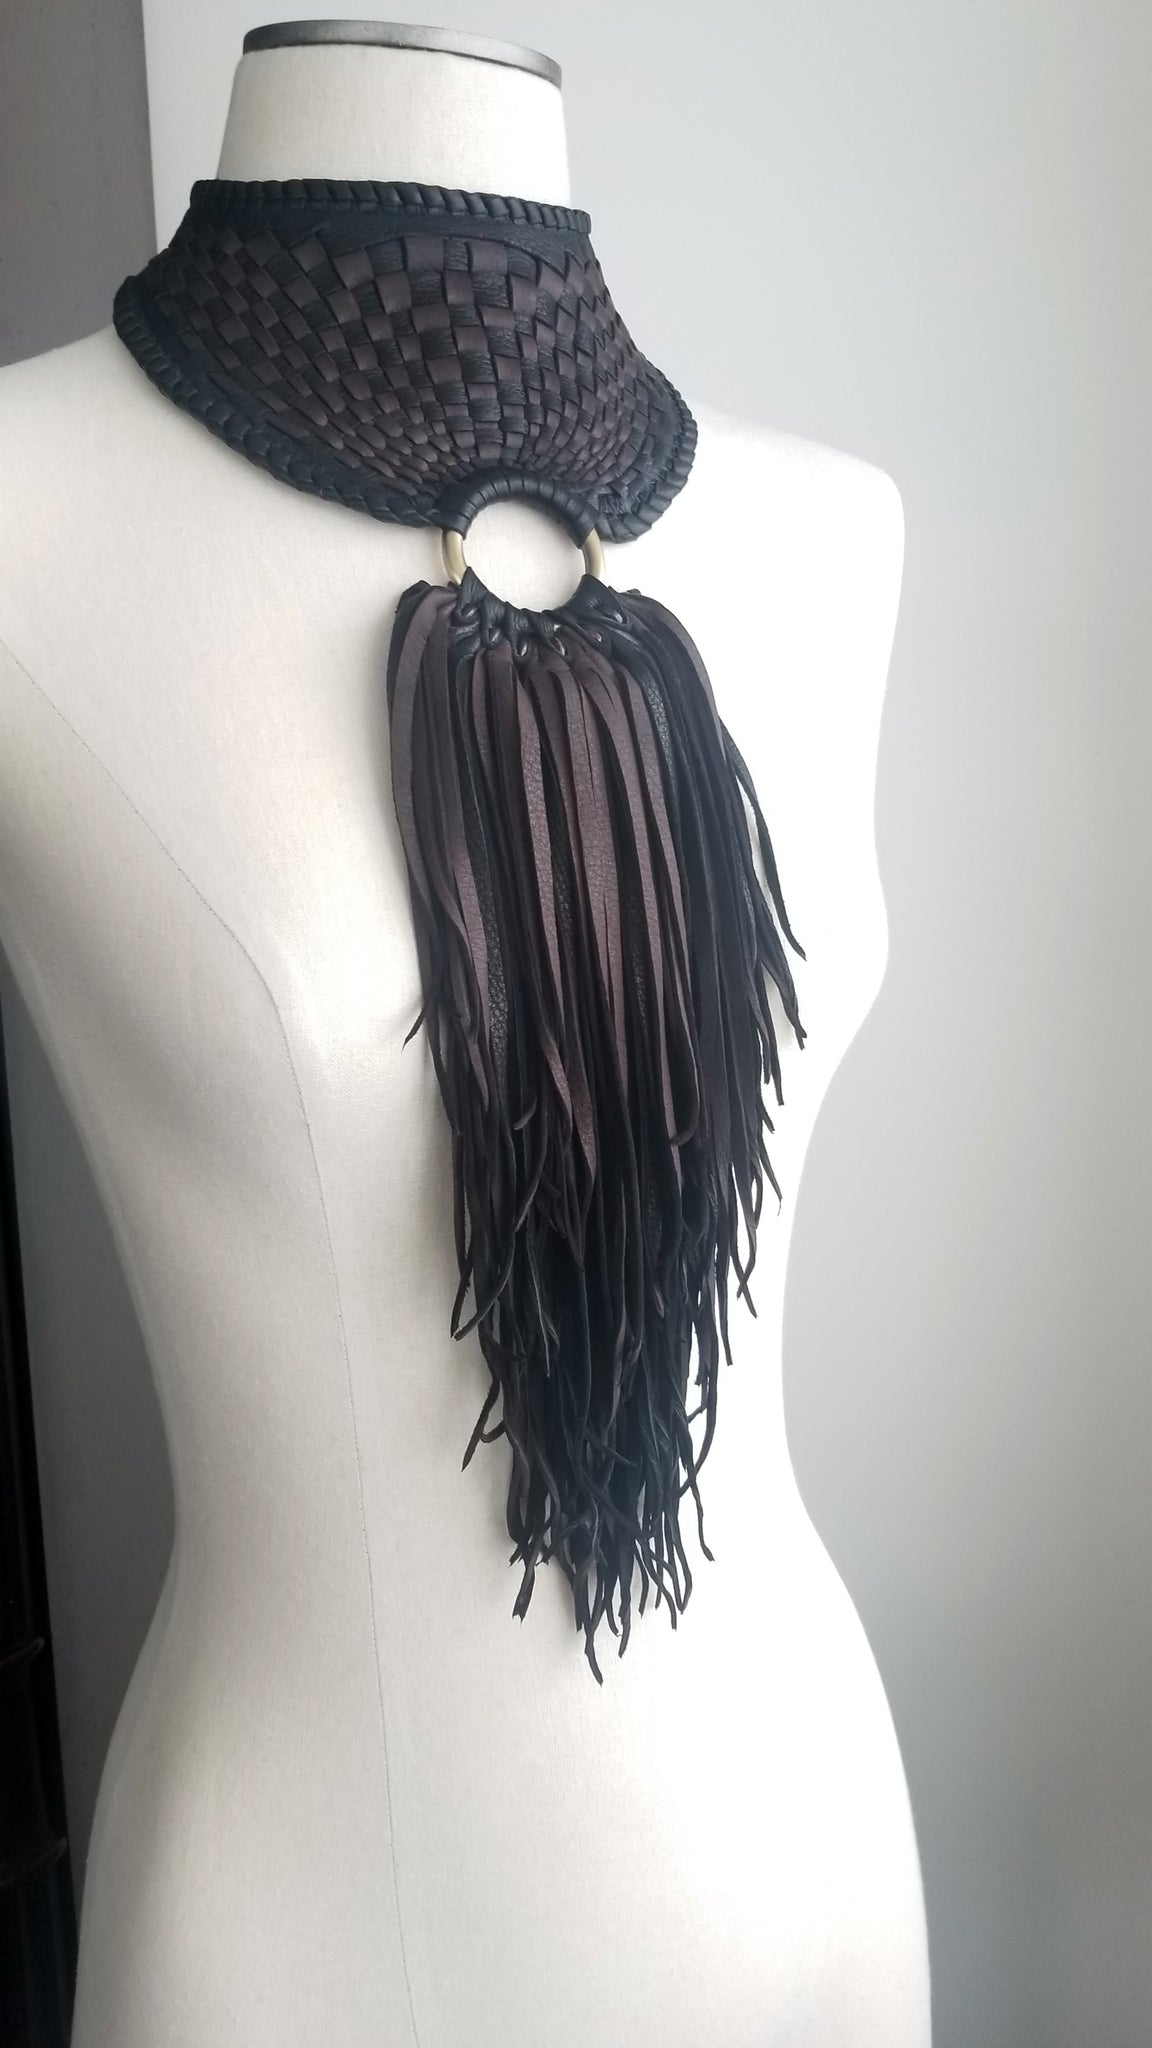 Zanta African Inspired, Braided Leather Statement Necklace, Bib Neckpiece, woven collar, fringe and tassels, on a dress form 